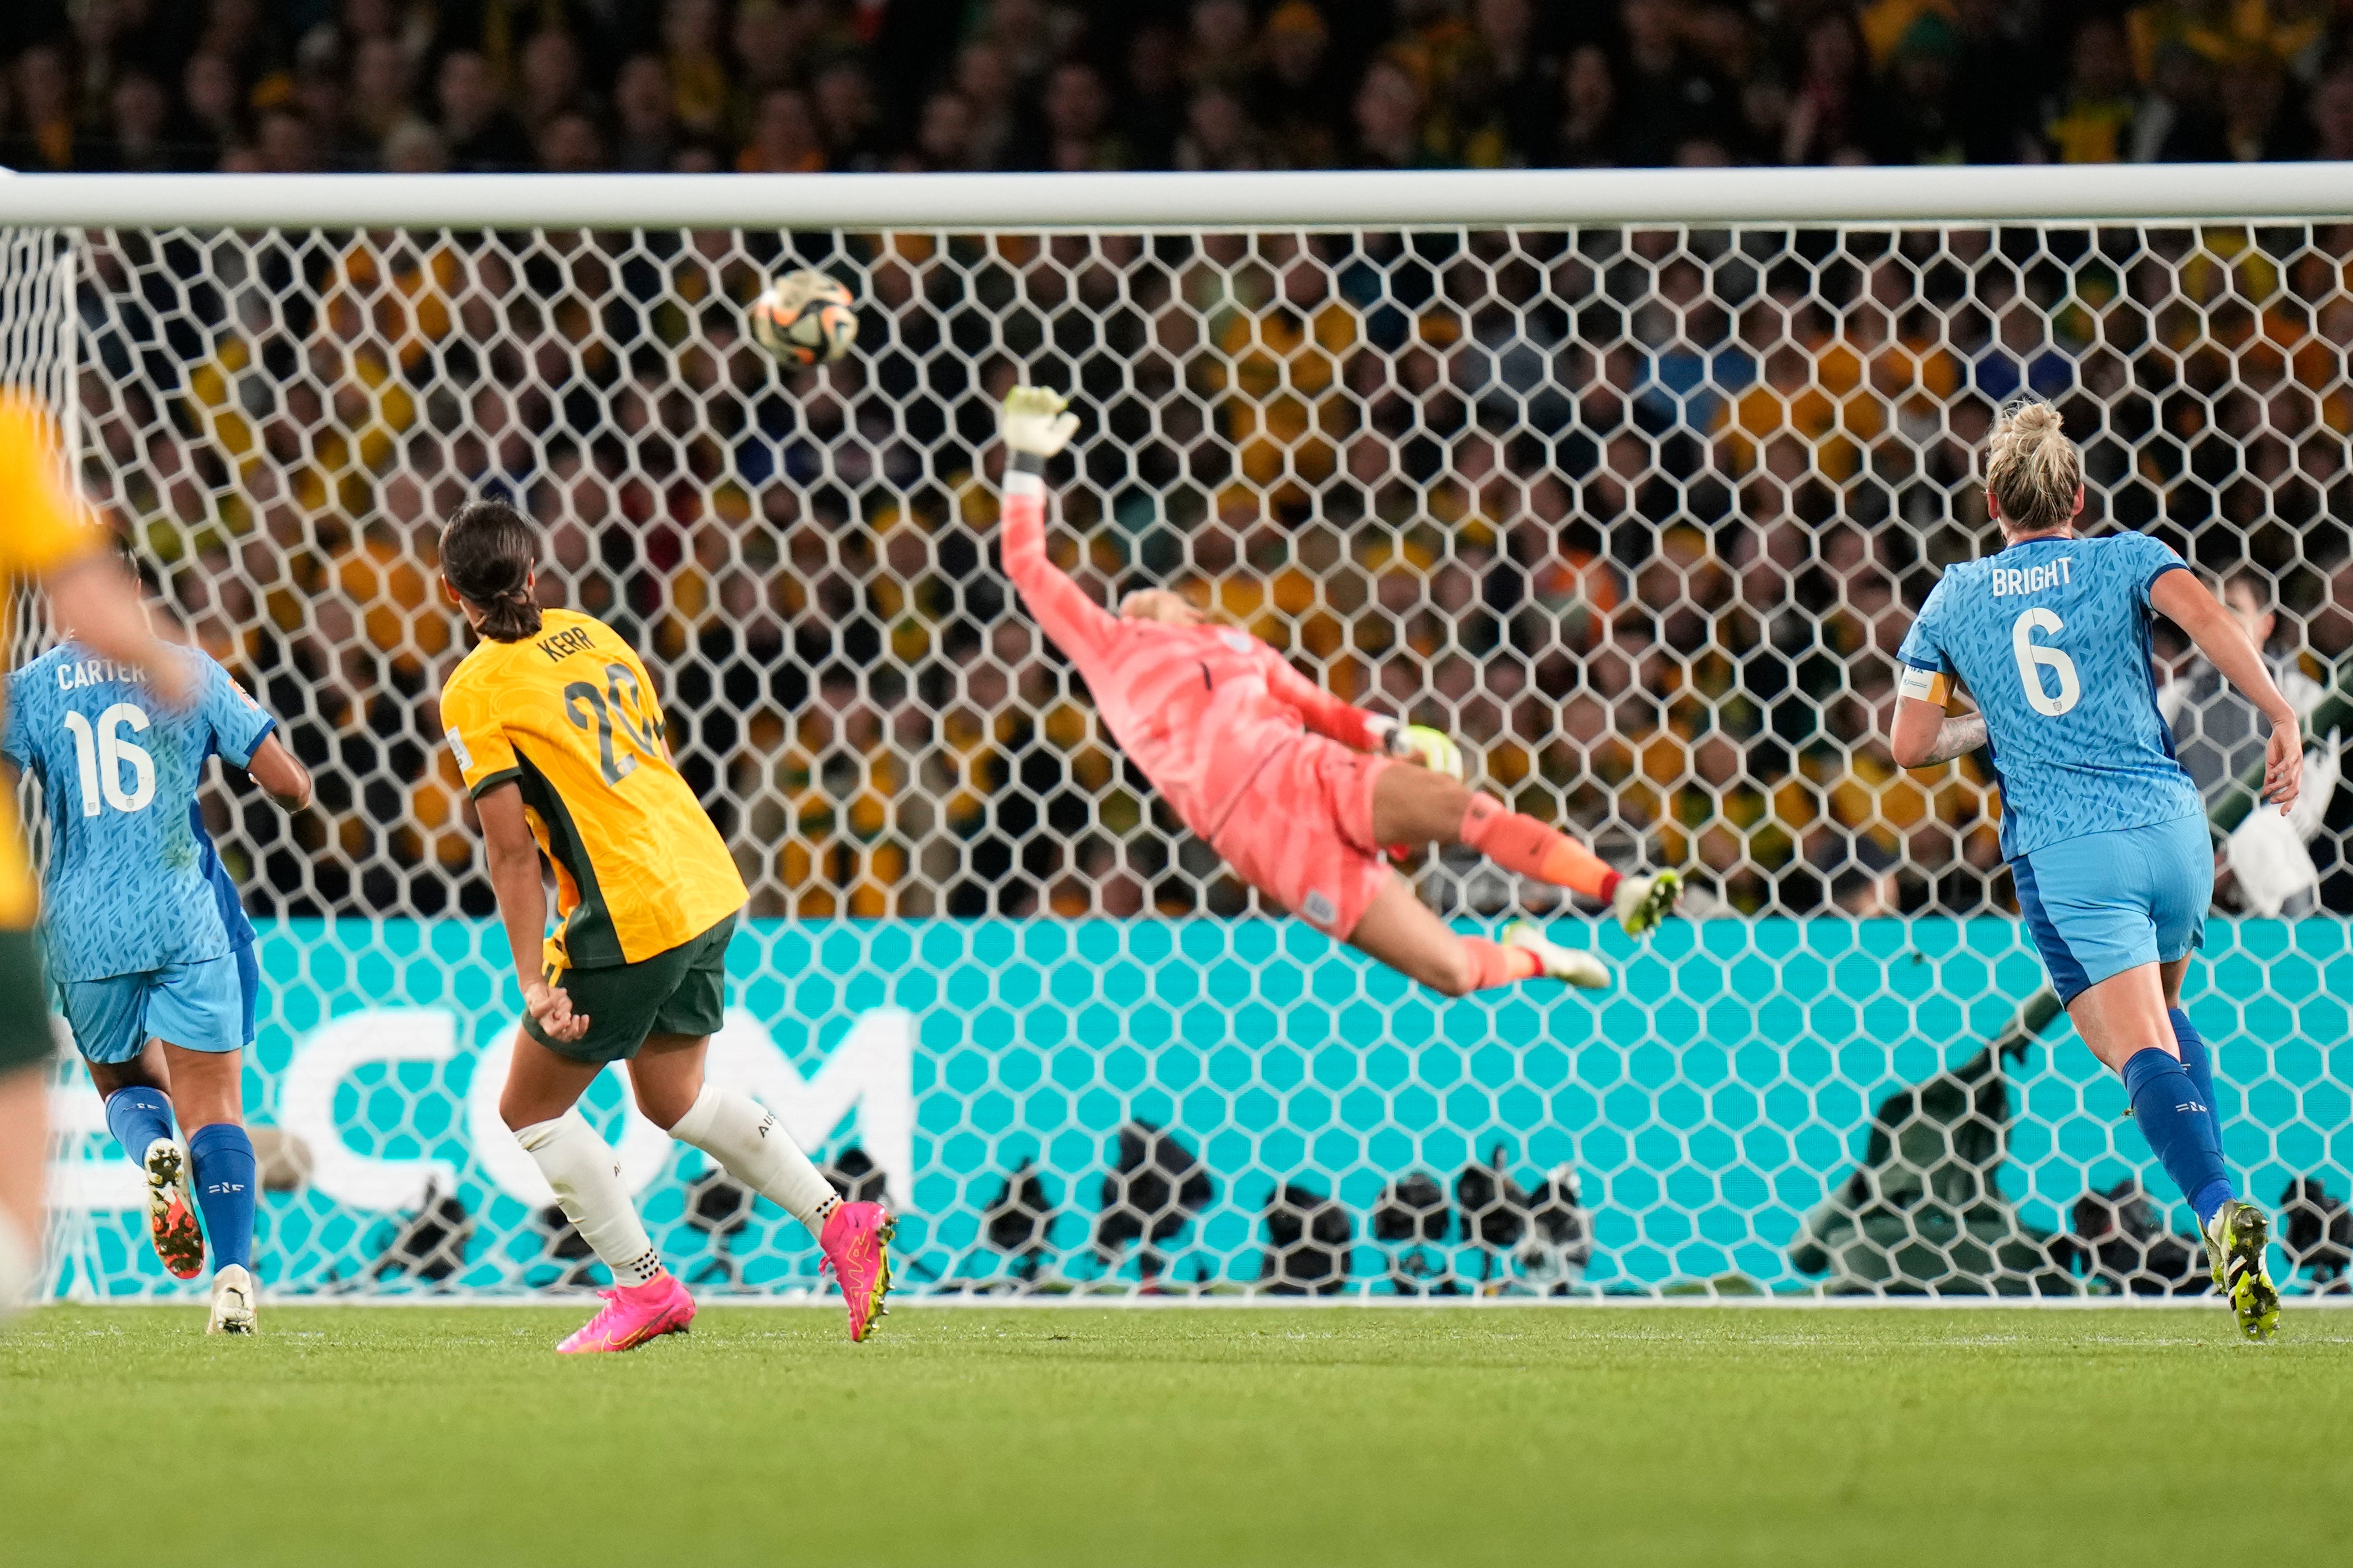 Sam Kerr gave the Matildas the moment they had been waiting for in a record-breaking semi-final